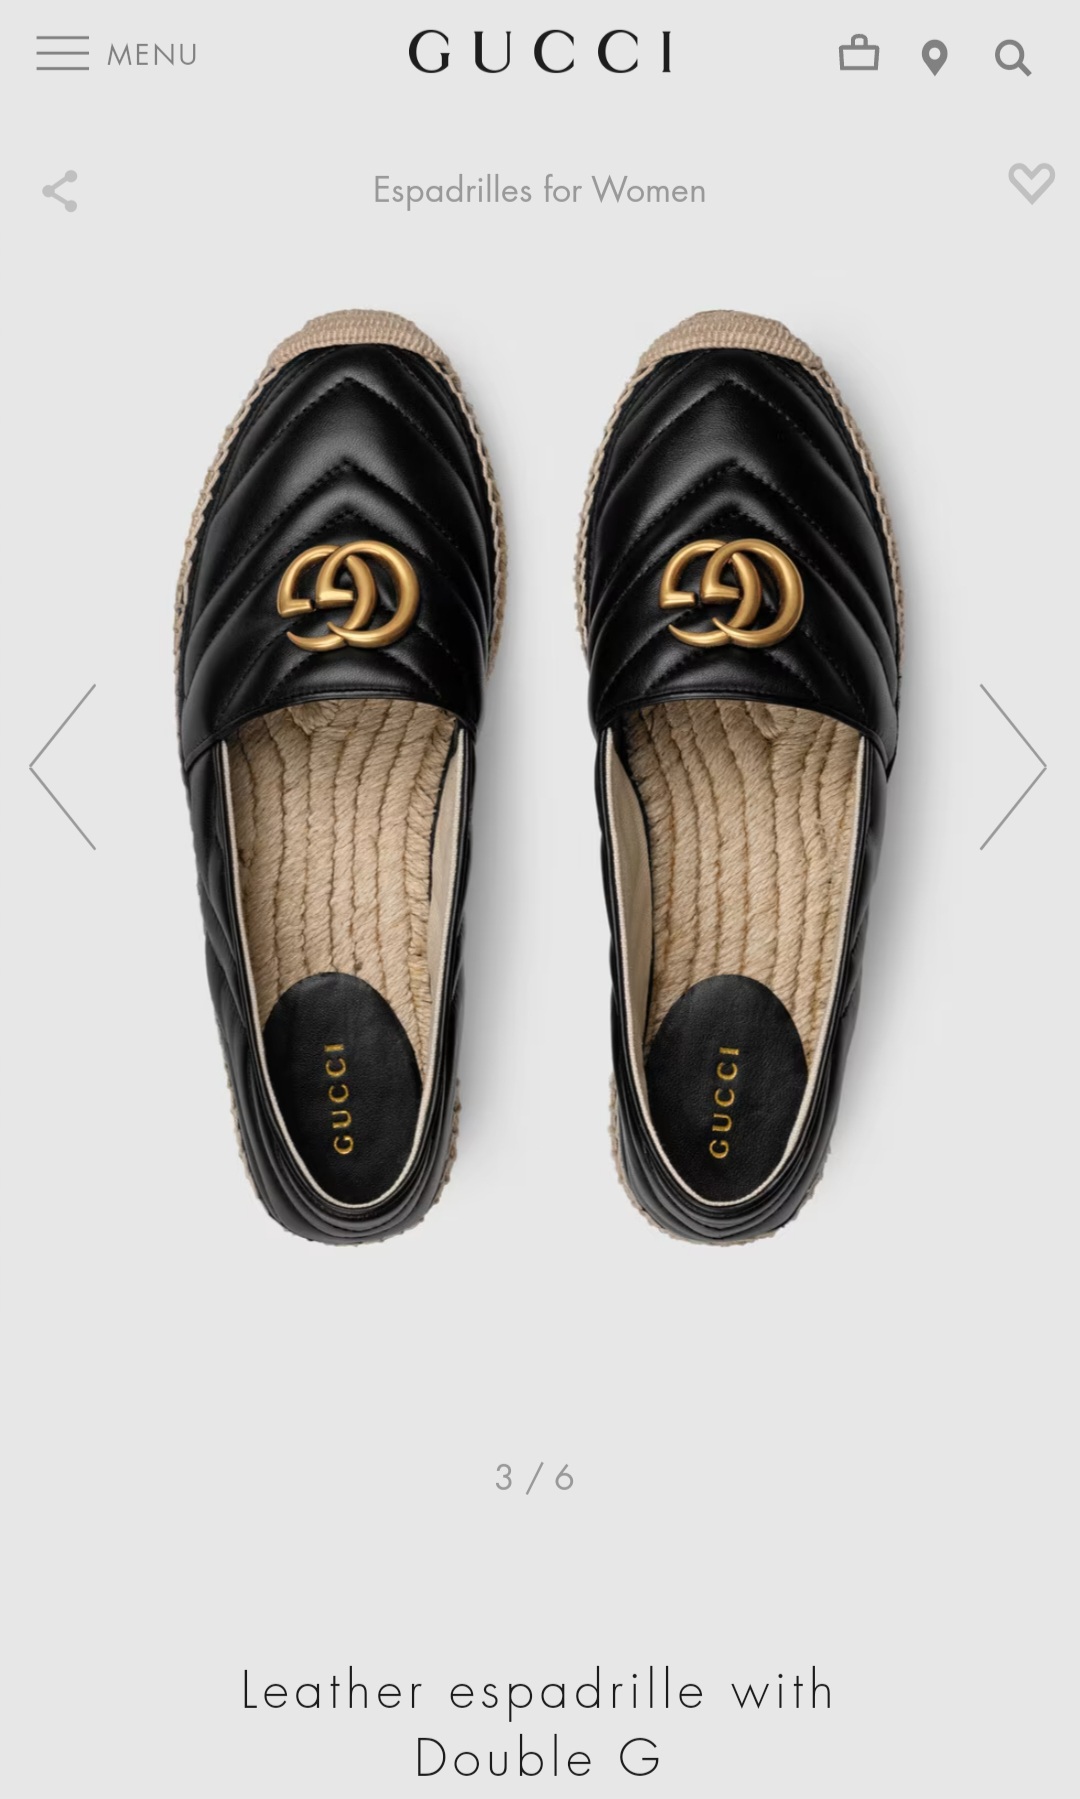 Gucci Leather espadrille with Double G shoe